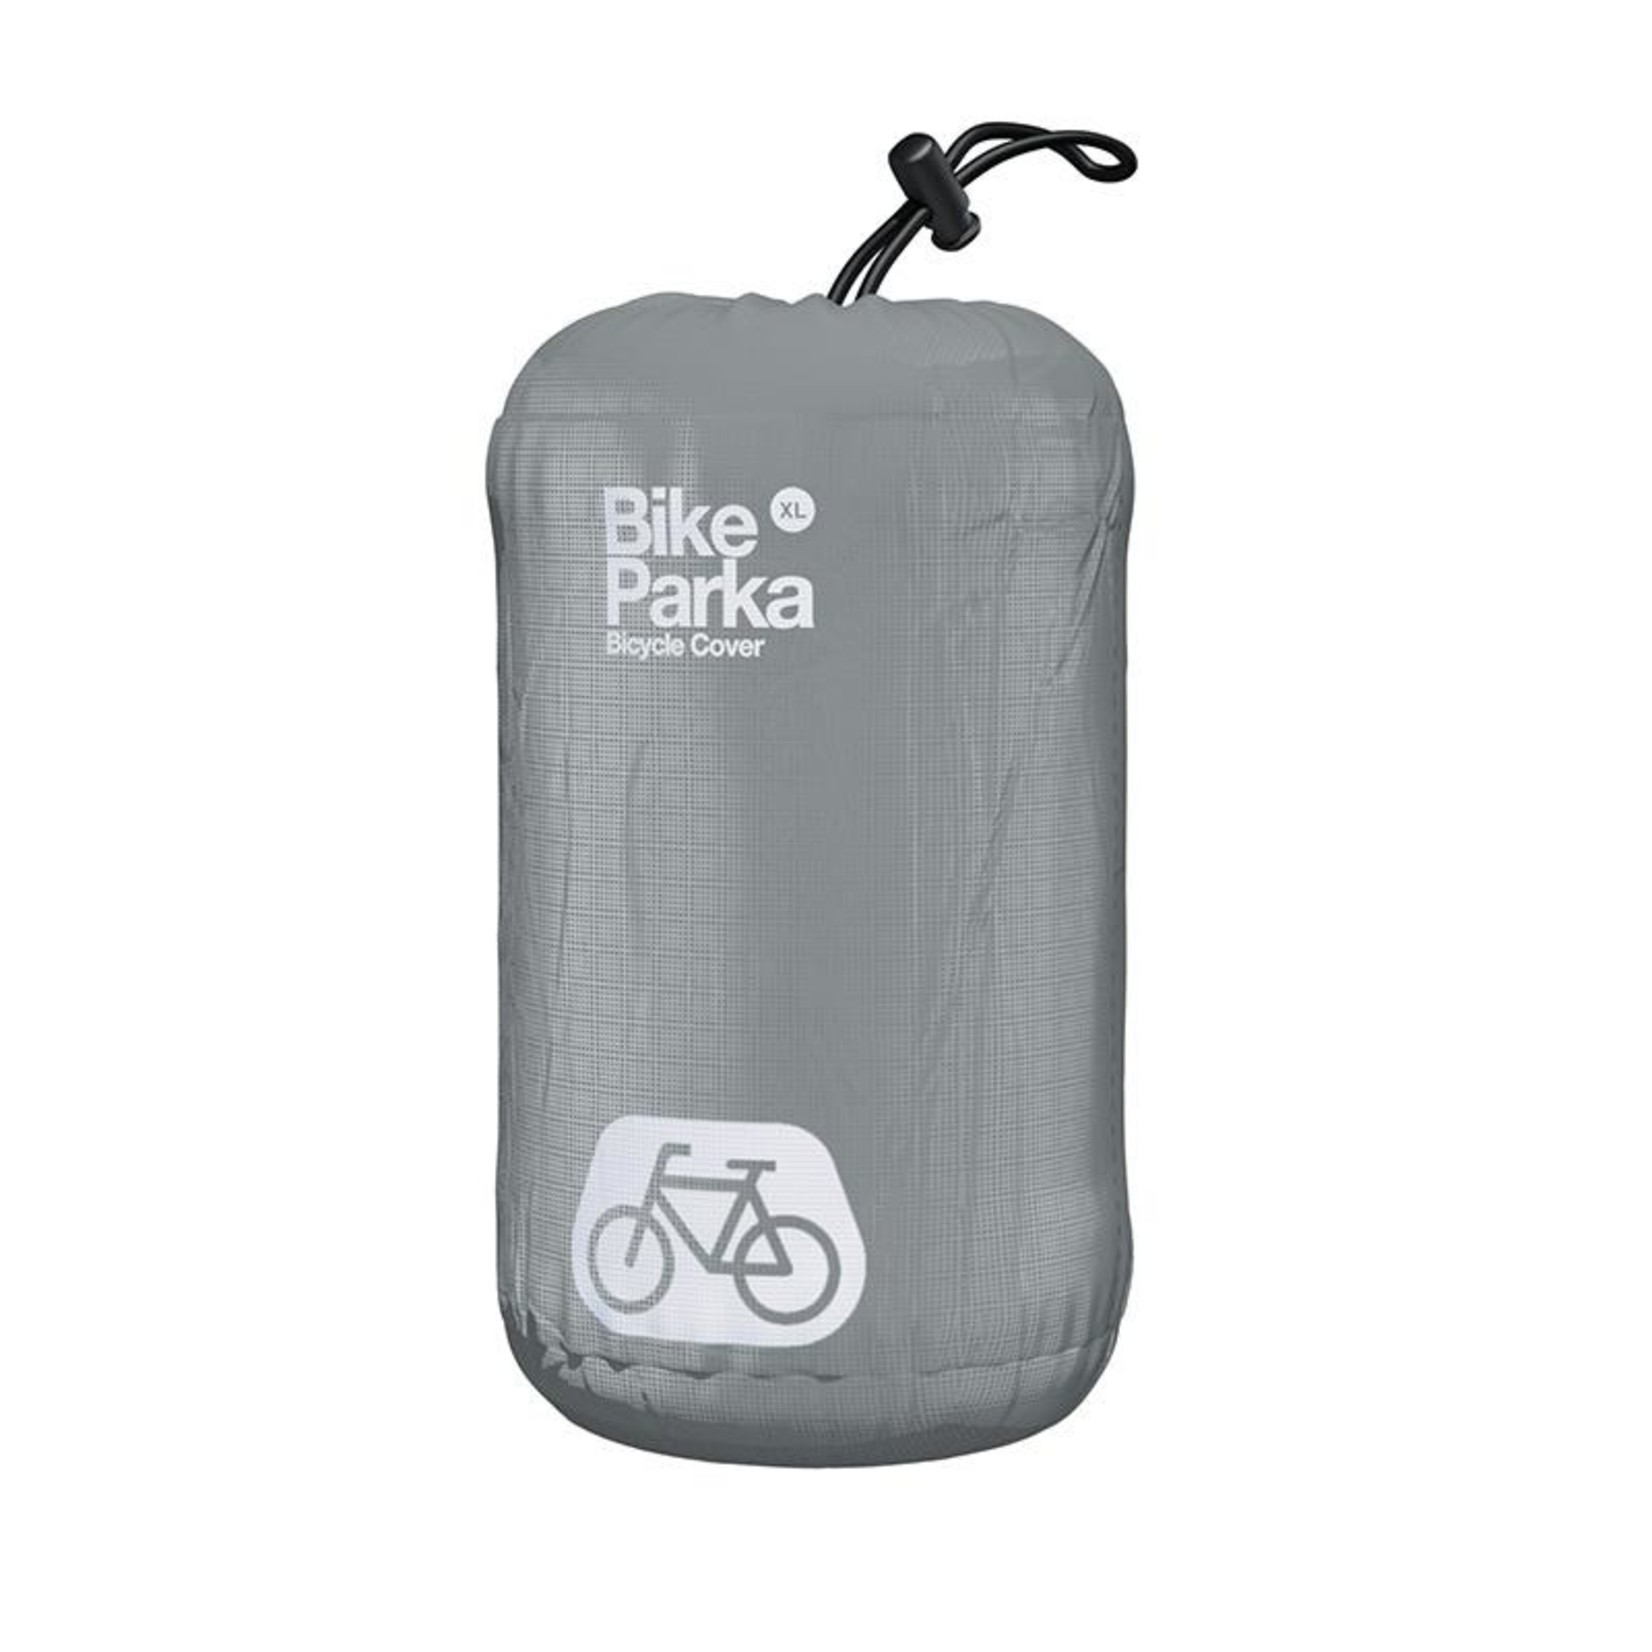 Bike Parka Bicycle Cover